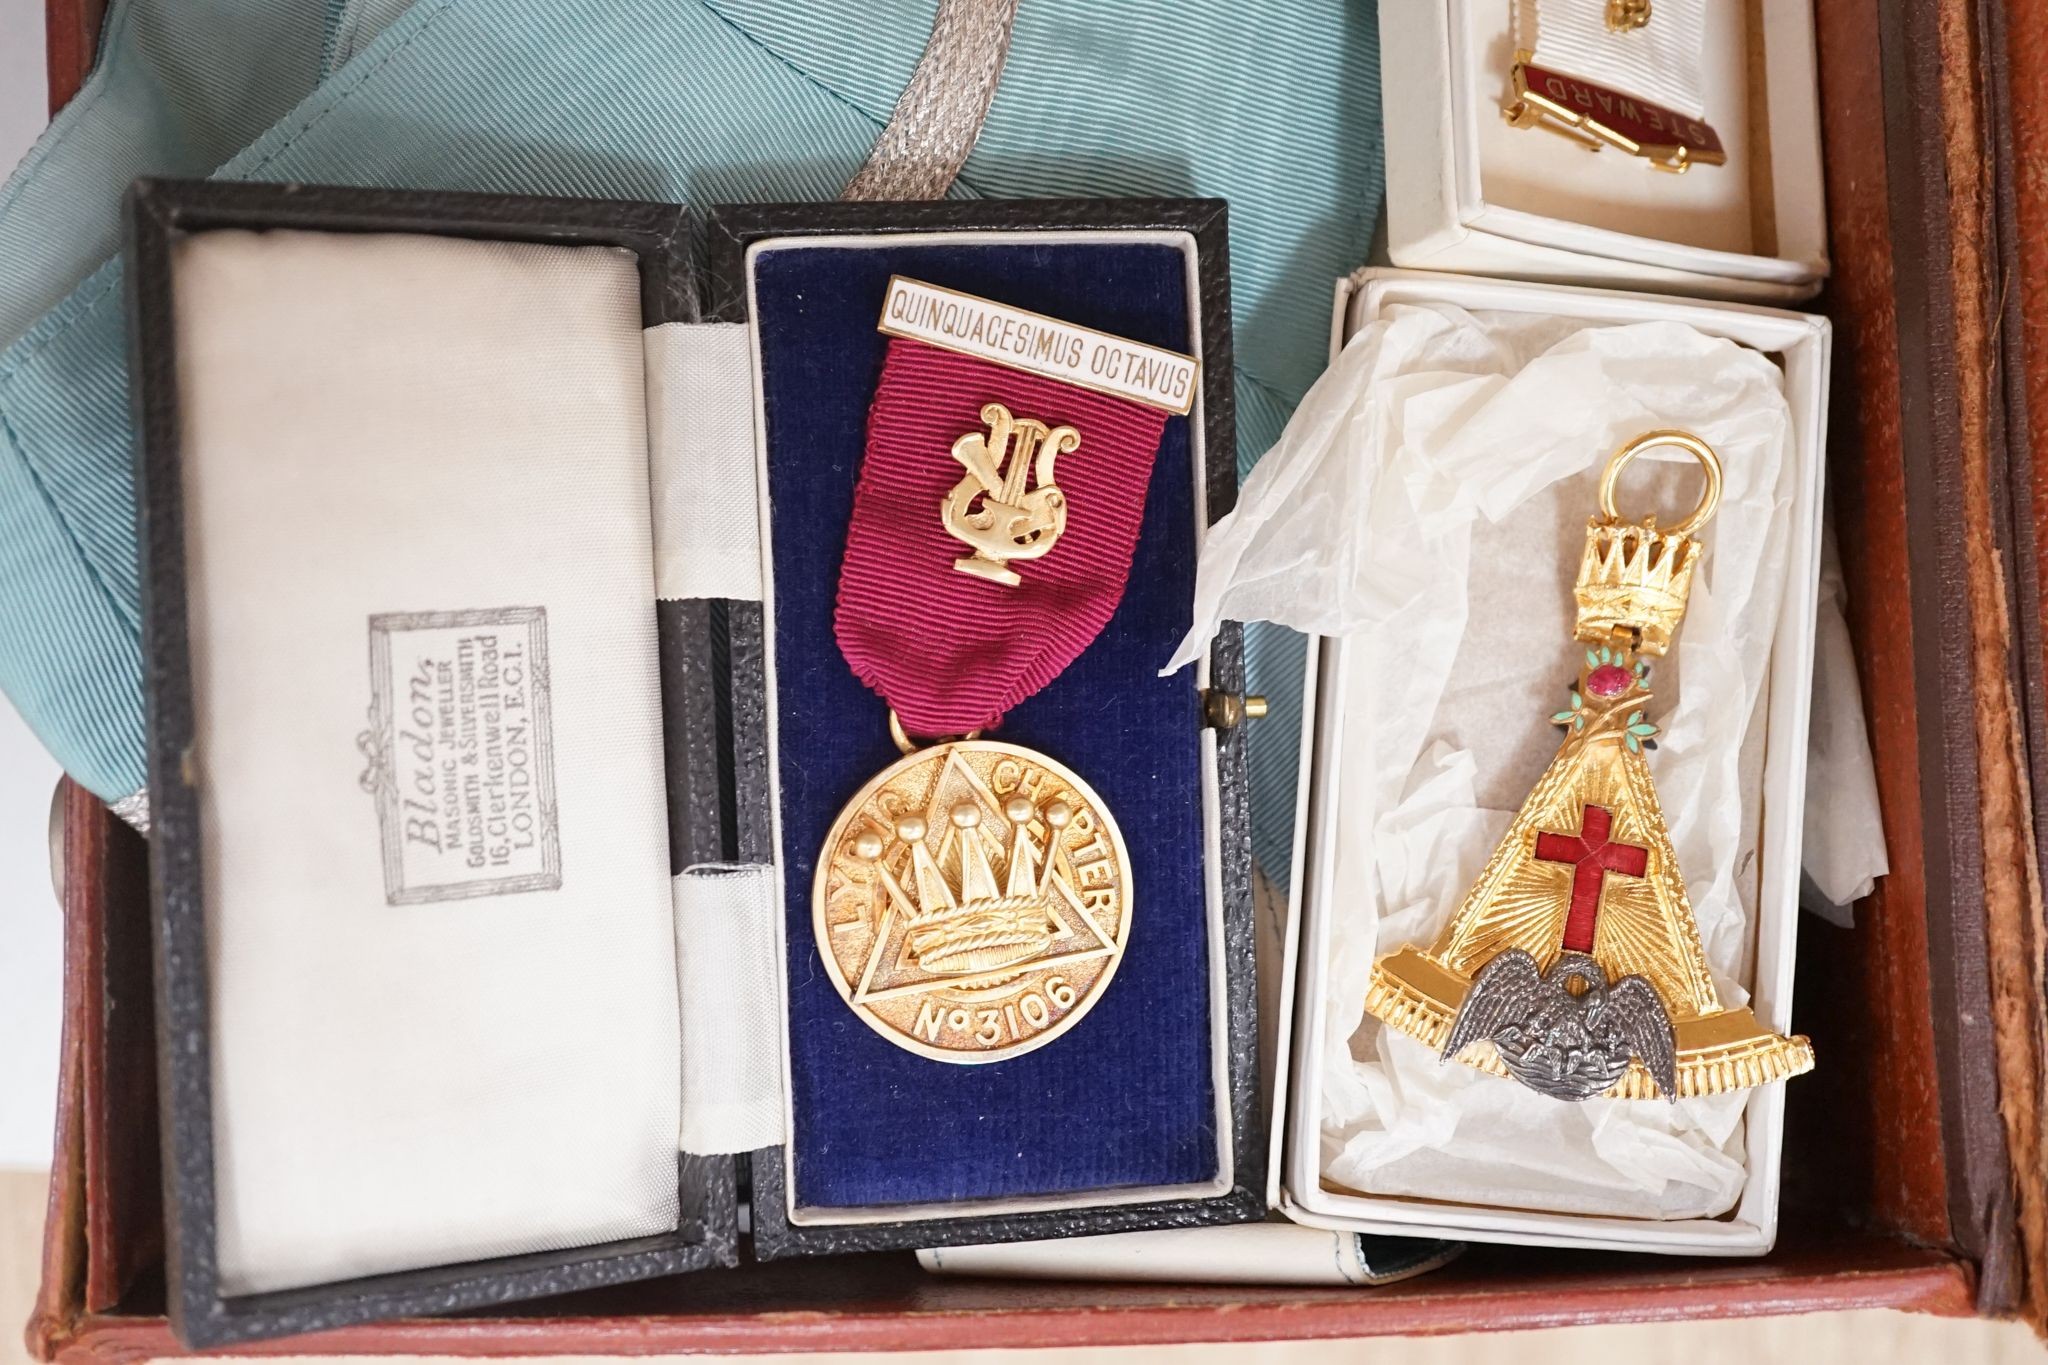 A group of masonic regalia and medals